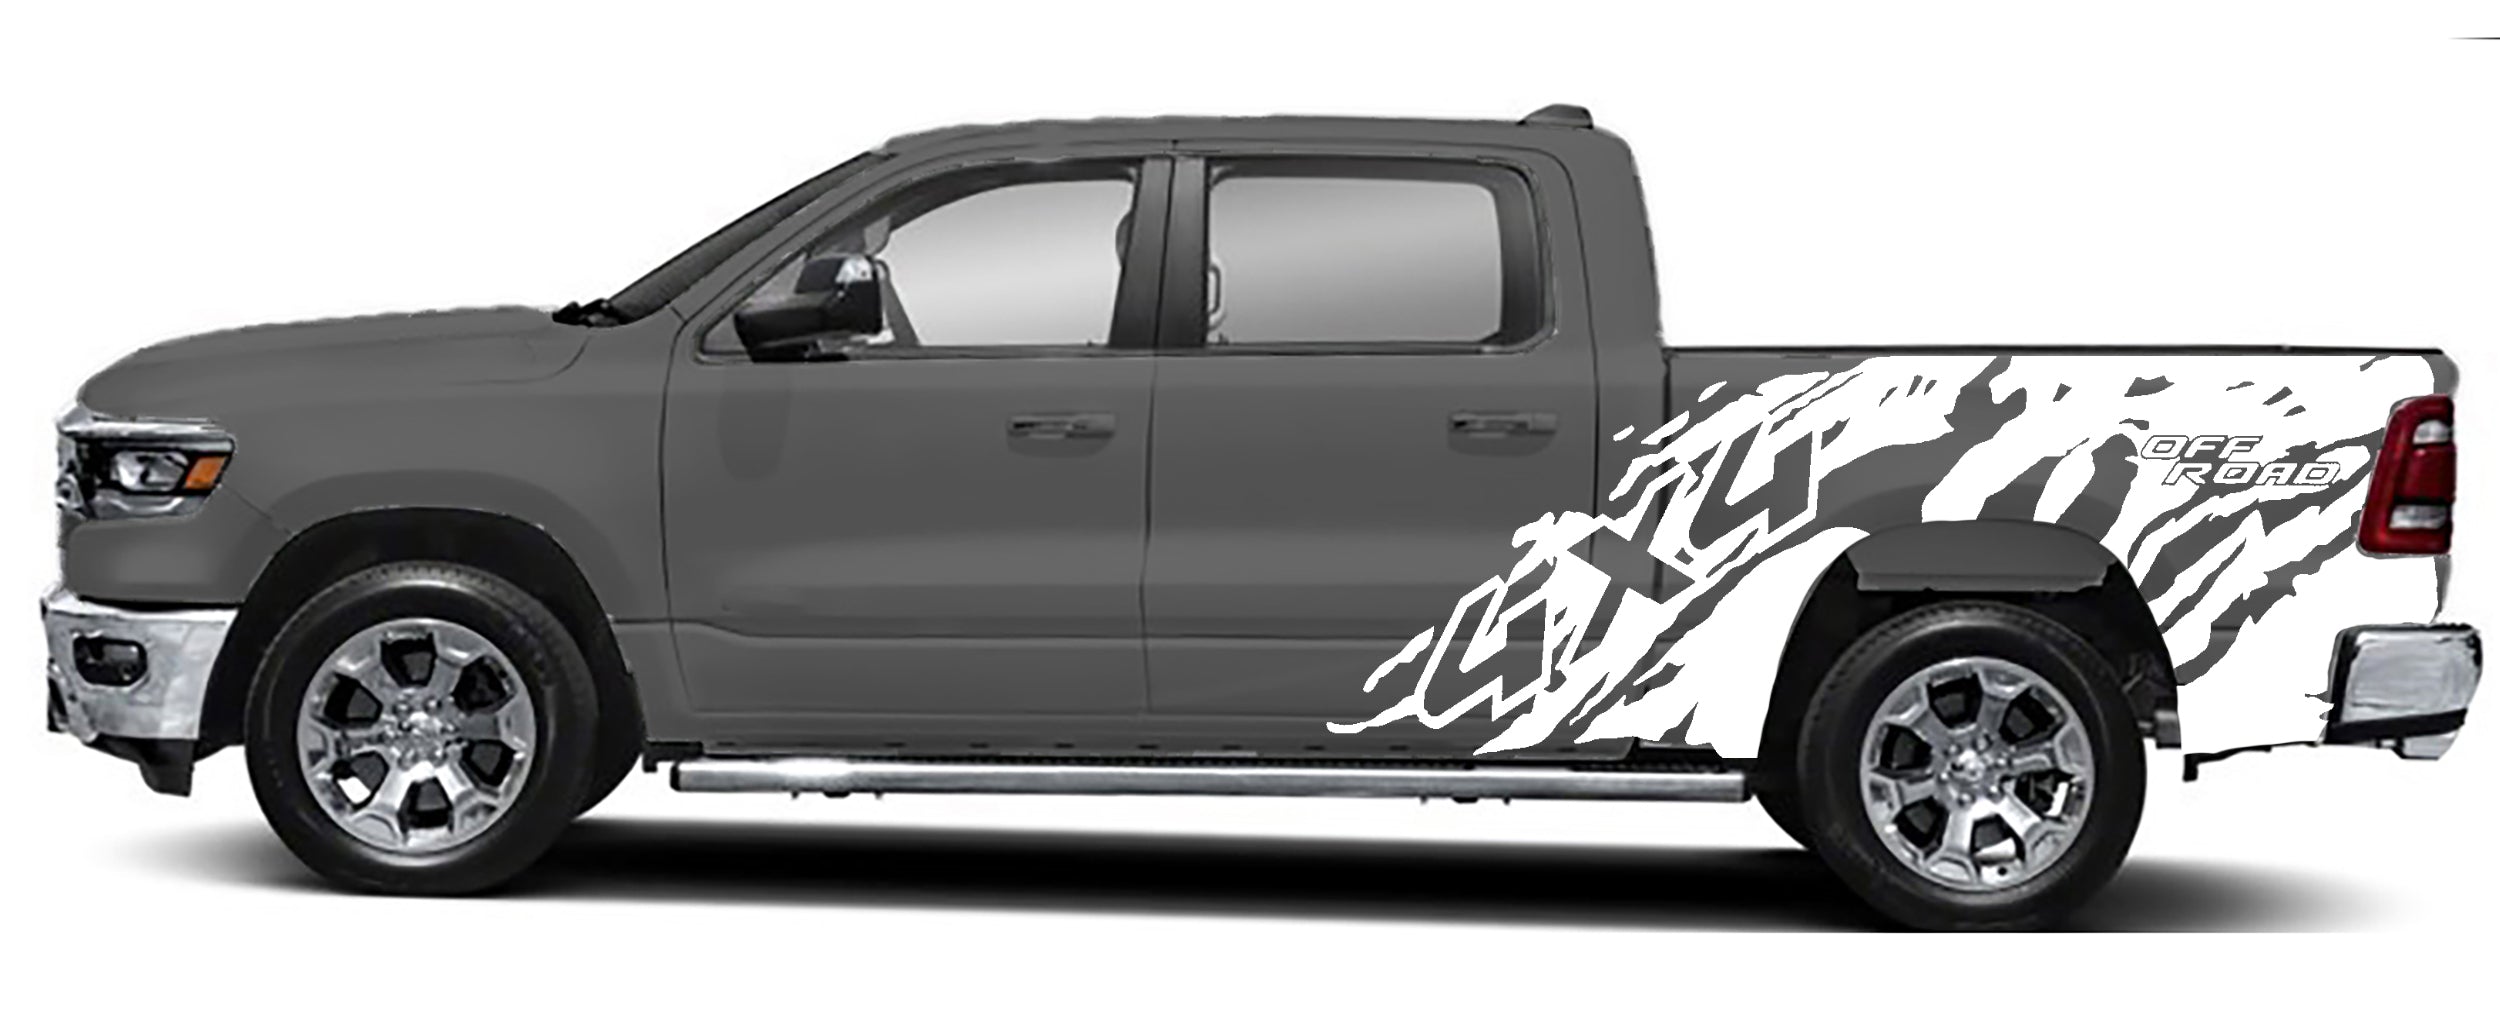 4x4 off road side graphics for dodge ram 1500 2500 2019 to 2023 models white